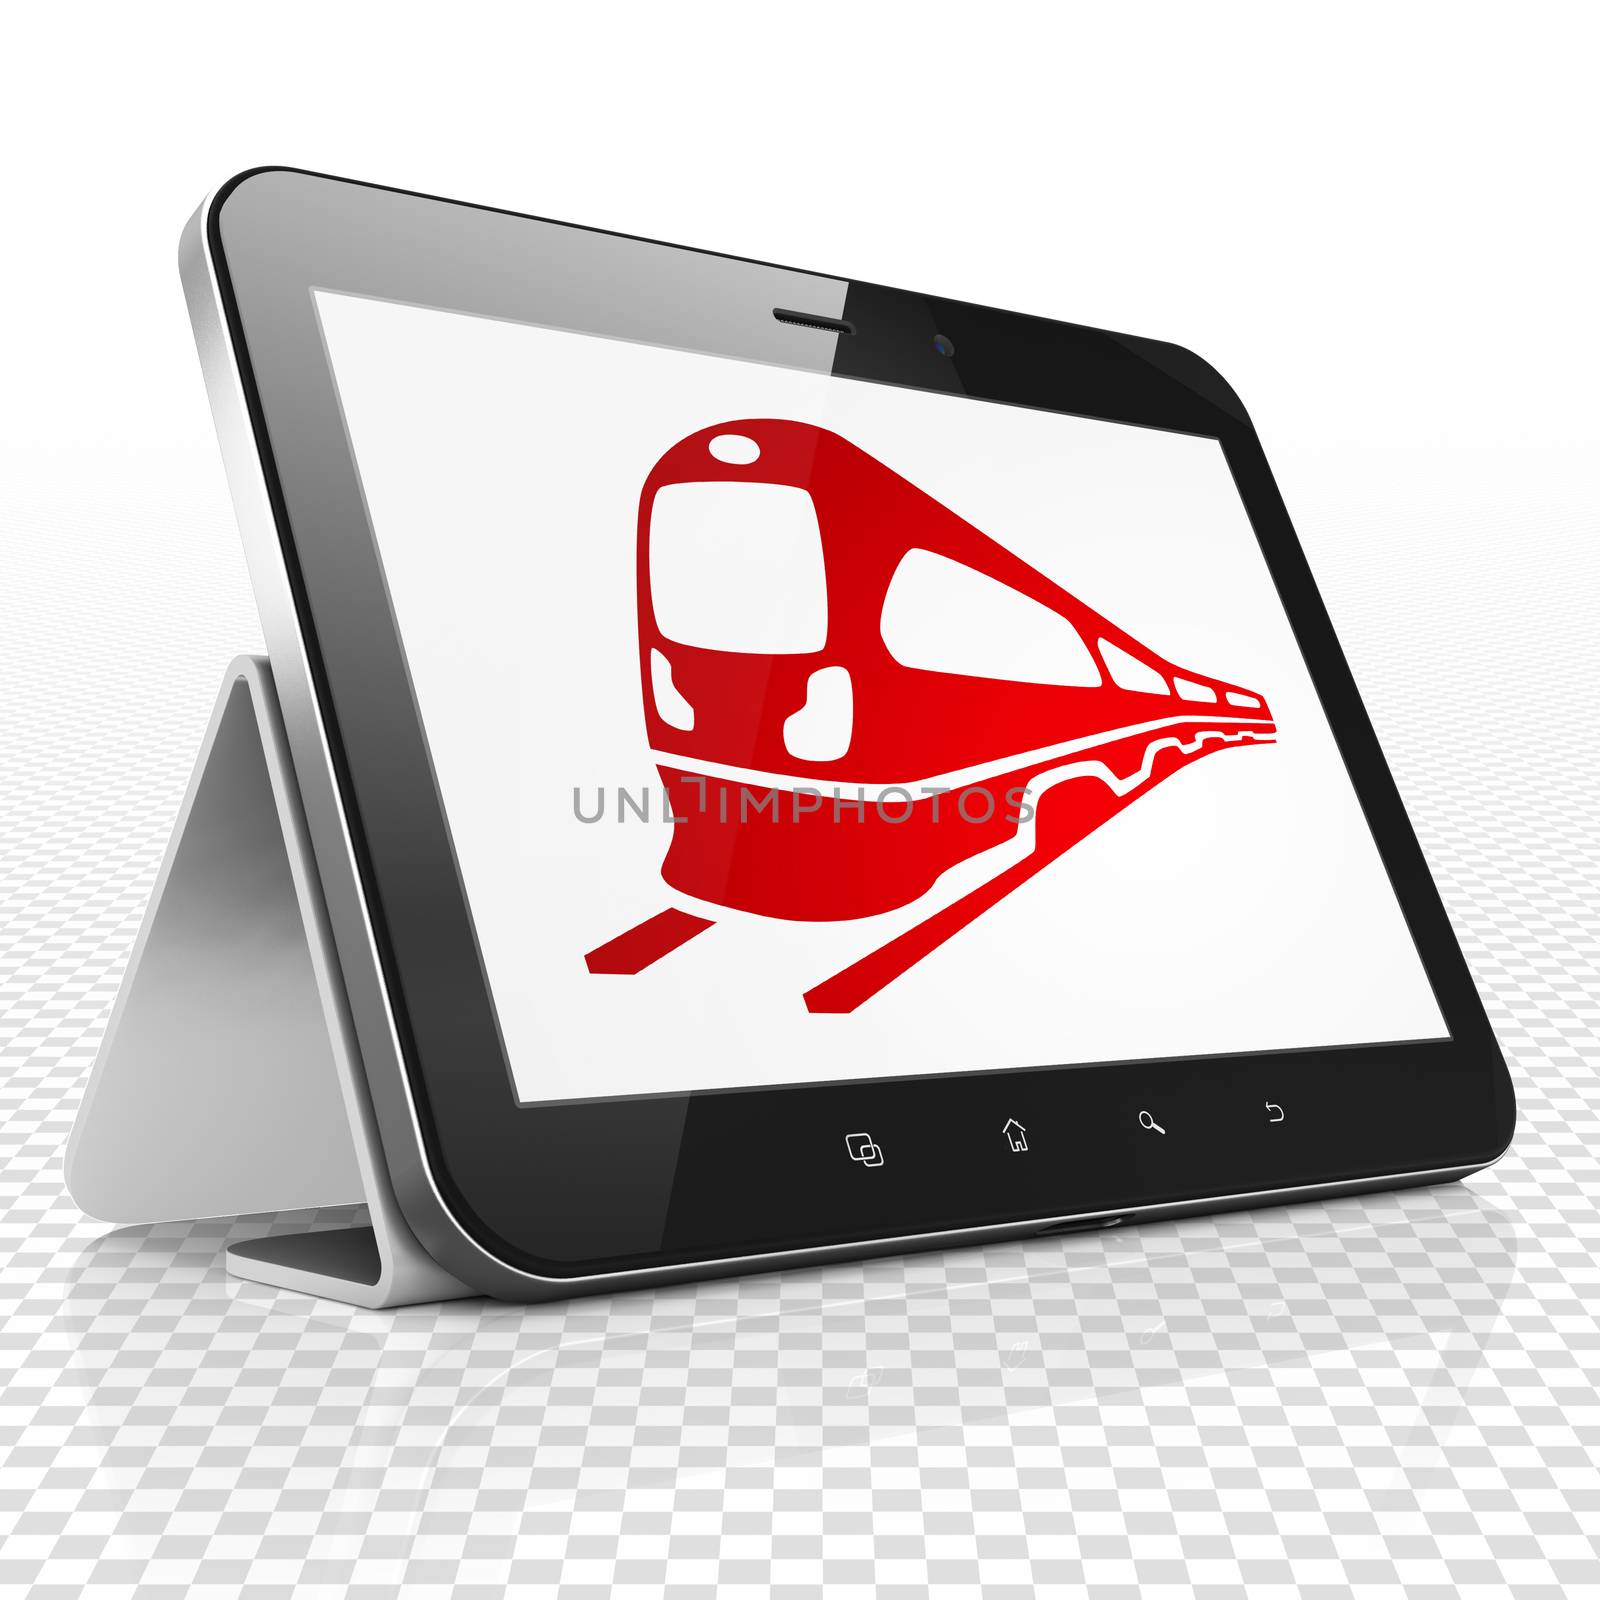 Tourism concept: Tablet Computer with red Train icon on display, 3D rendering